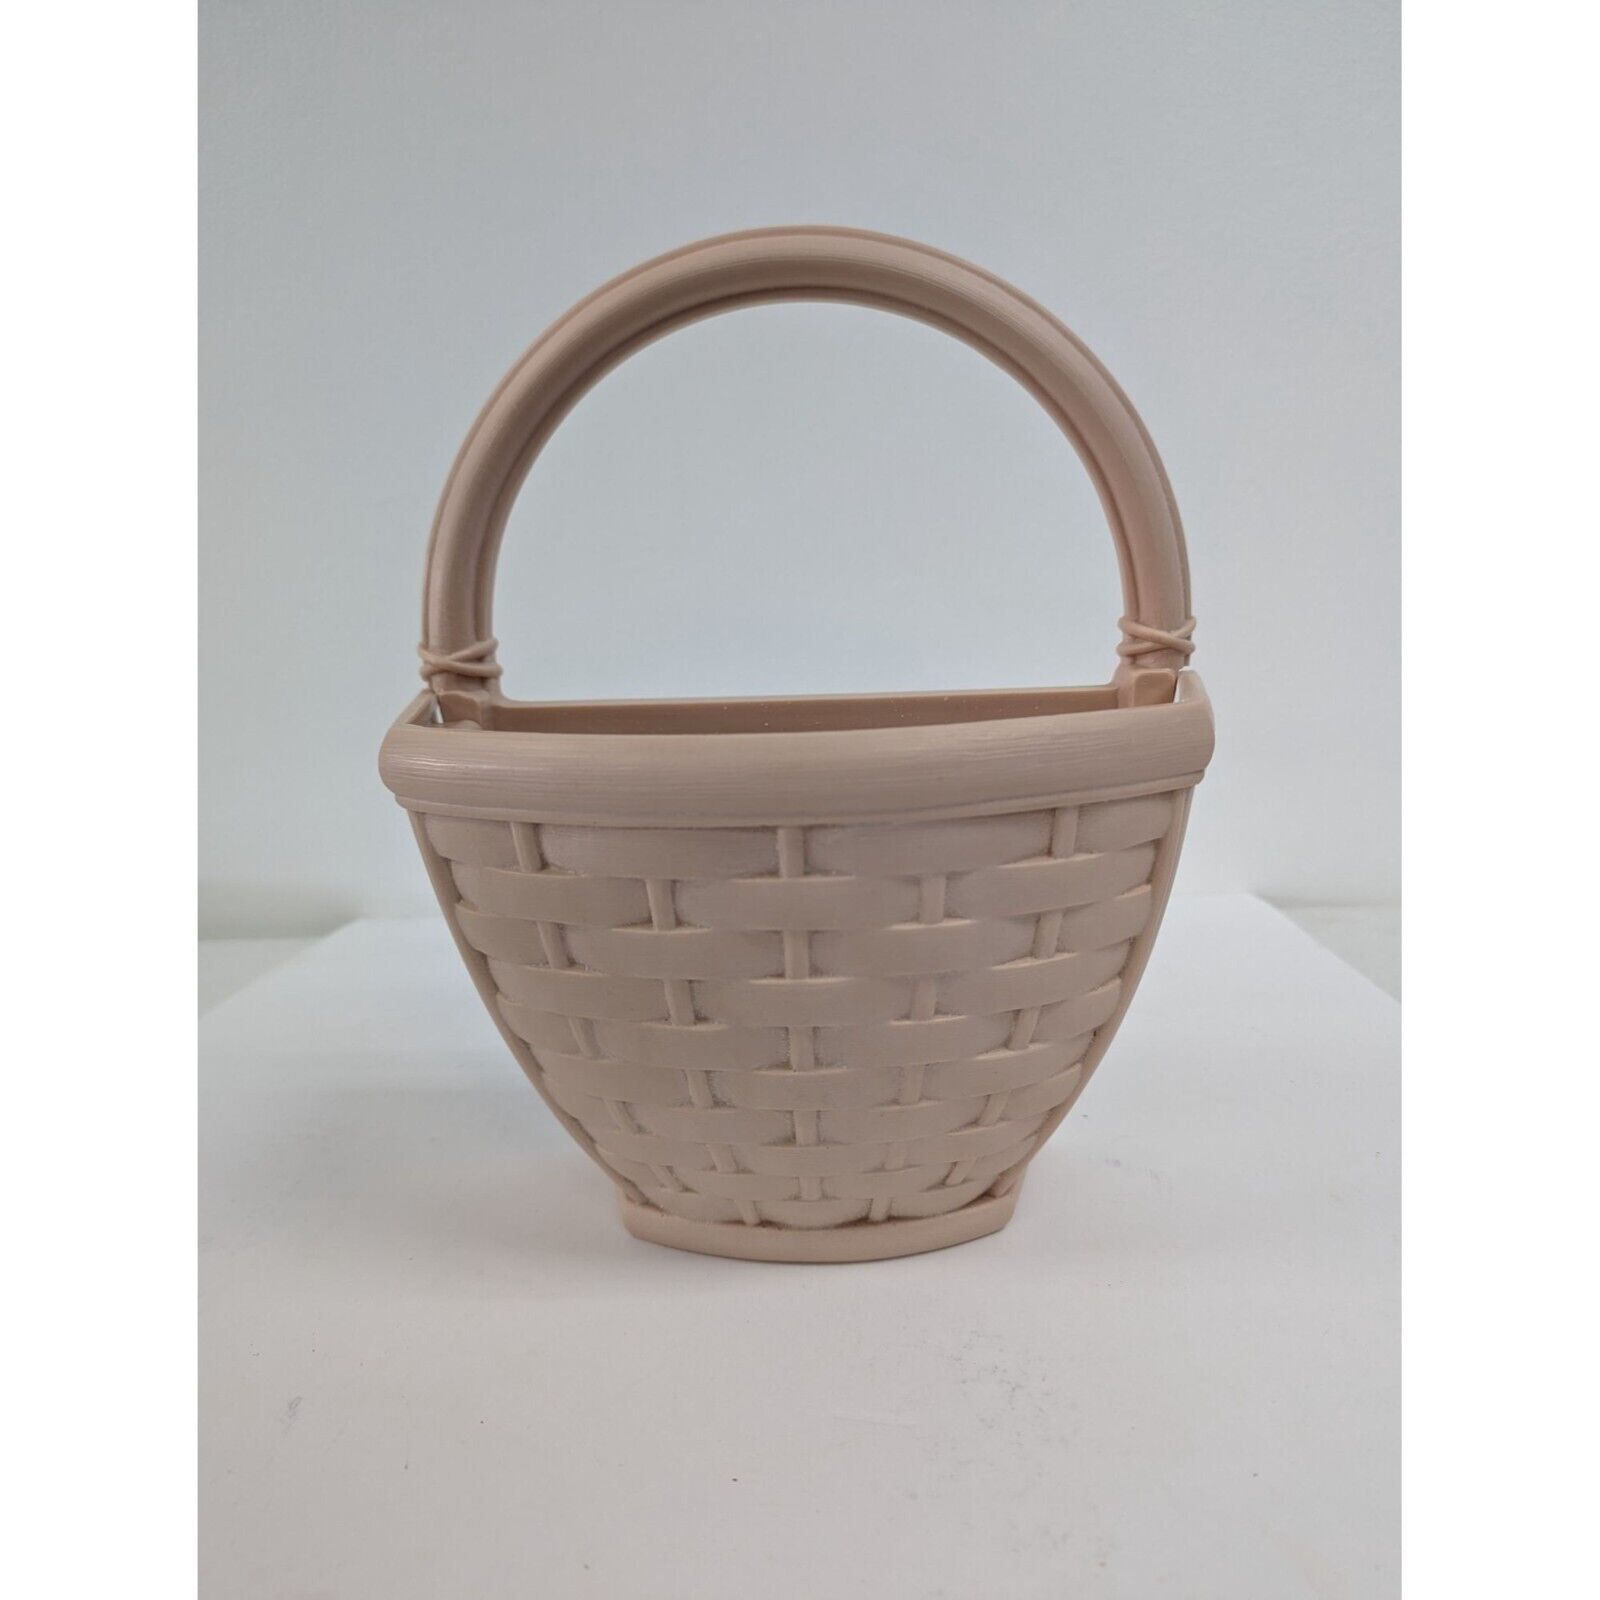 Vintage Homco Pink Wall Pocket Woven Basket 6090 for Artificial Flowers Foliage - $14.96